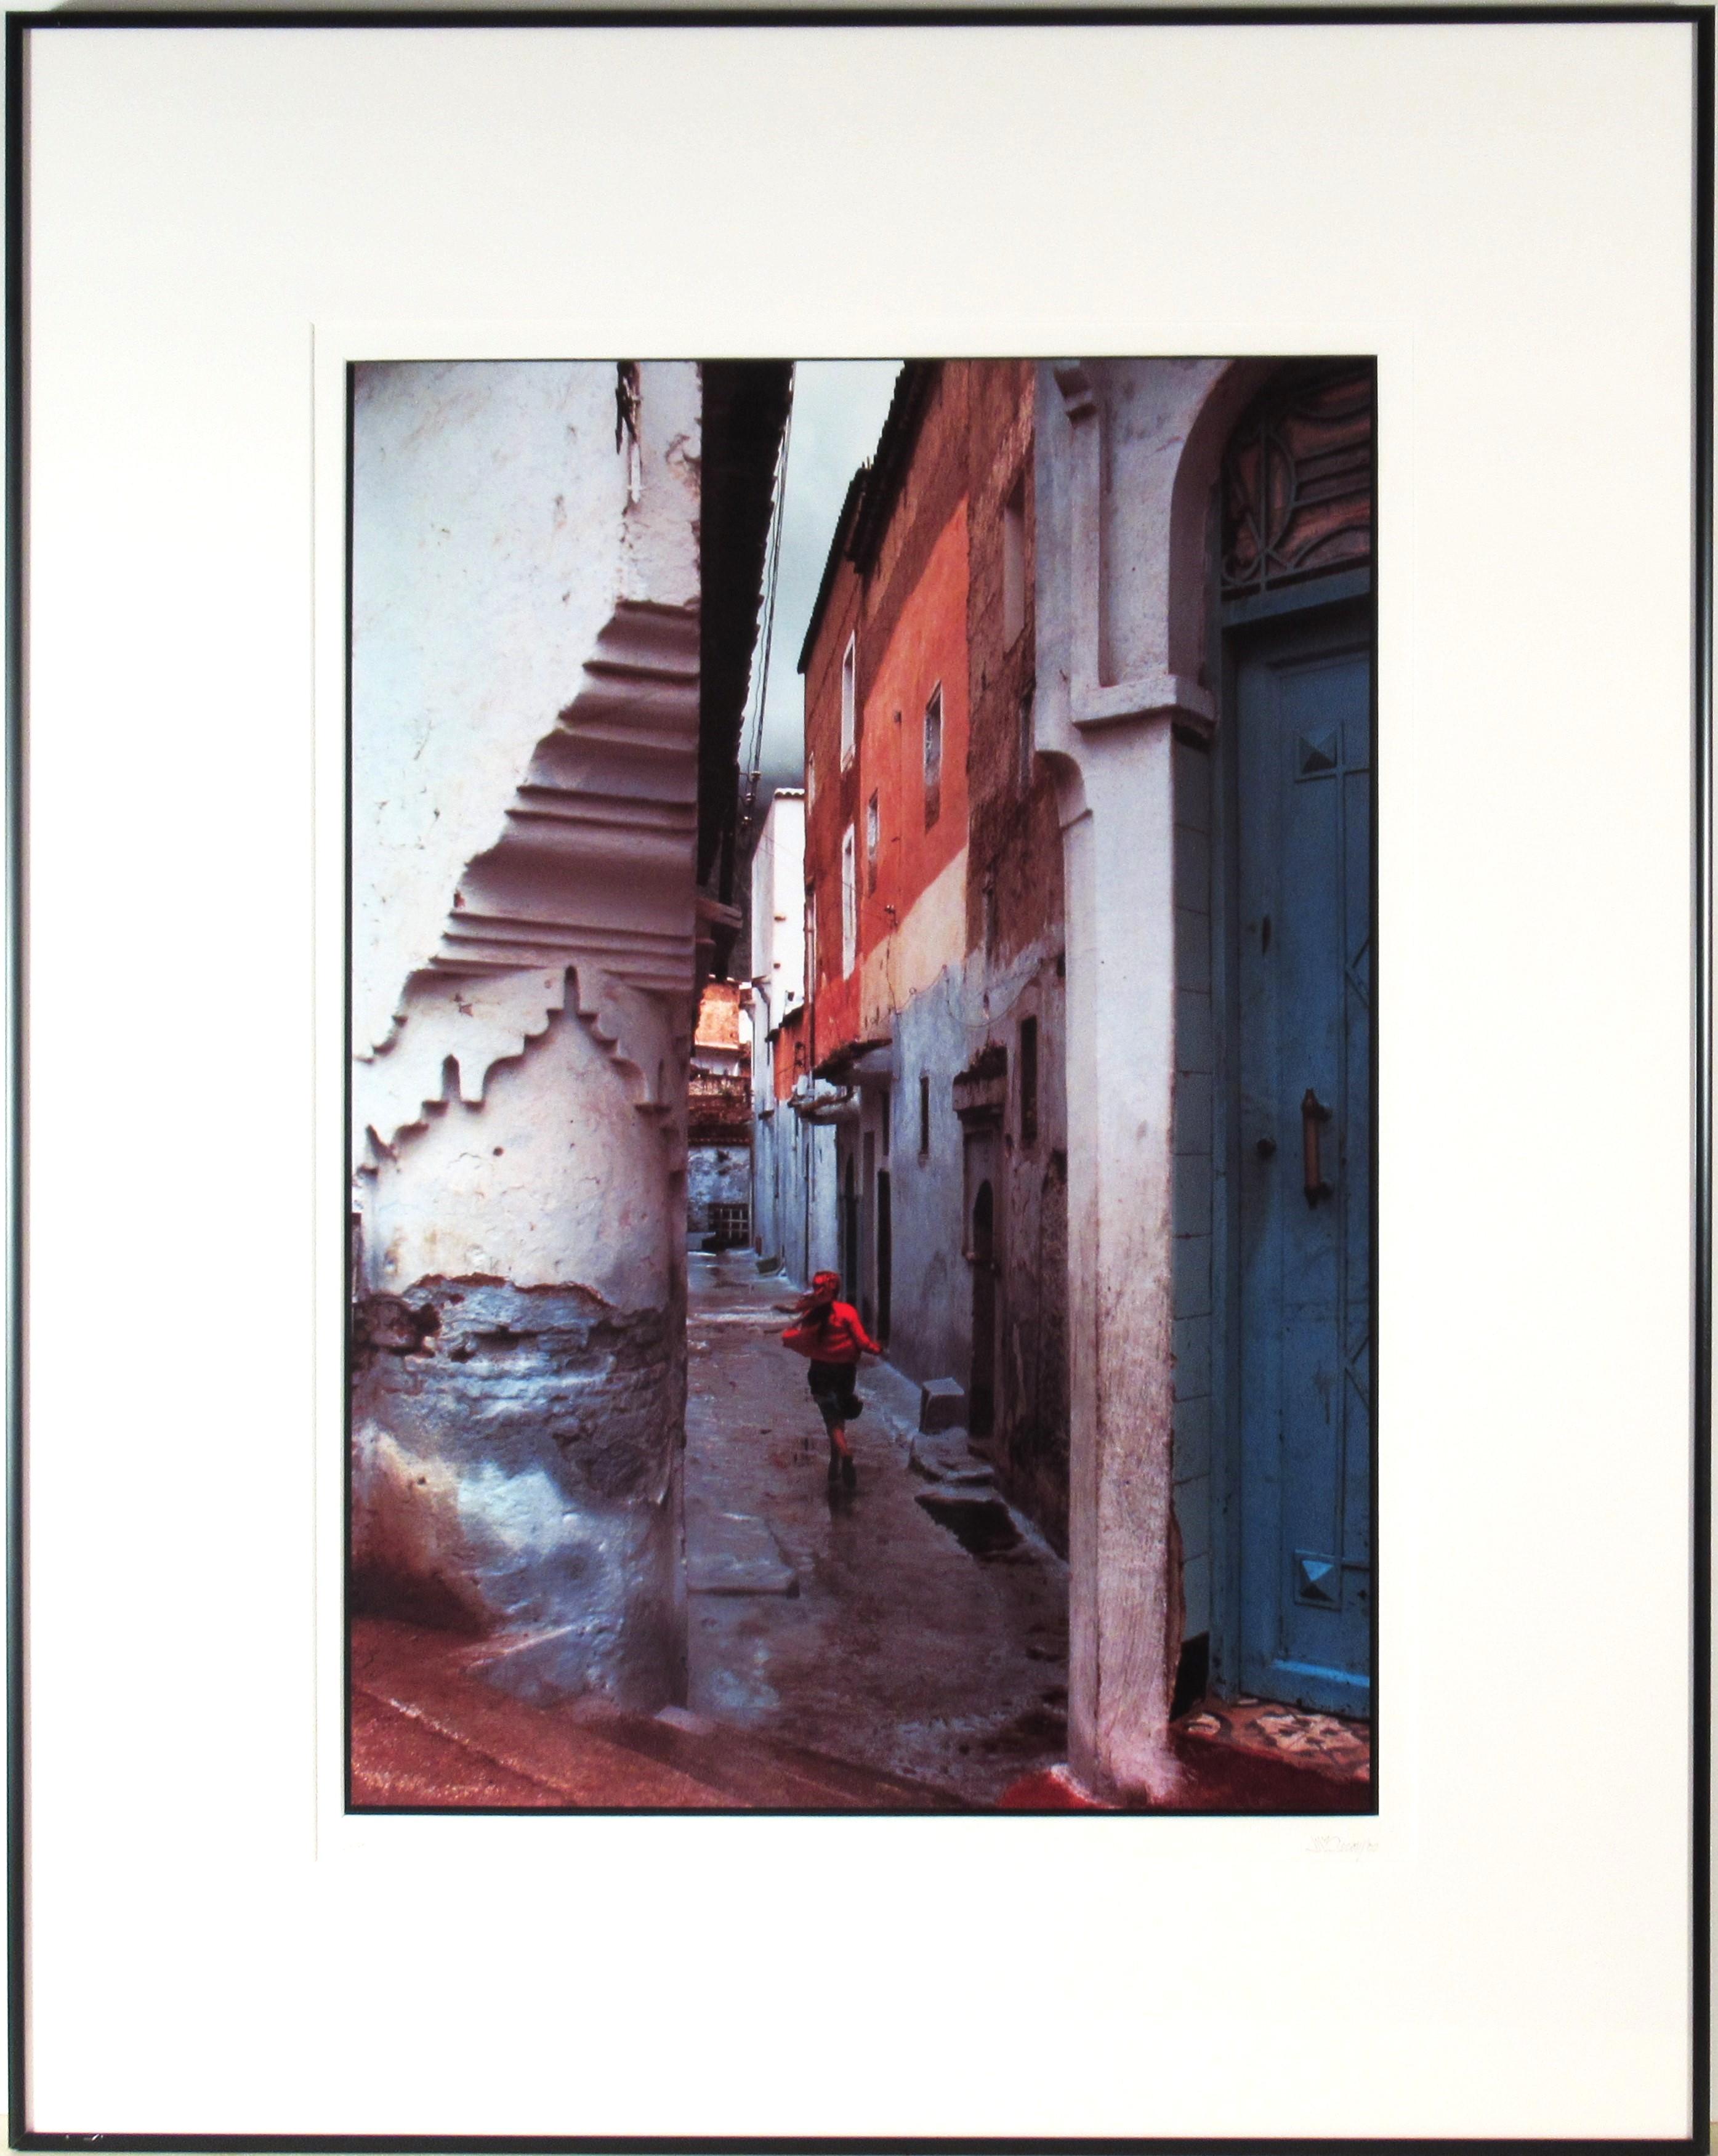 Jeffrey Becom Color Photograph - "Street in Chaouen, Morocco" Cibachrome photograph